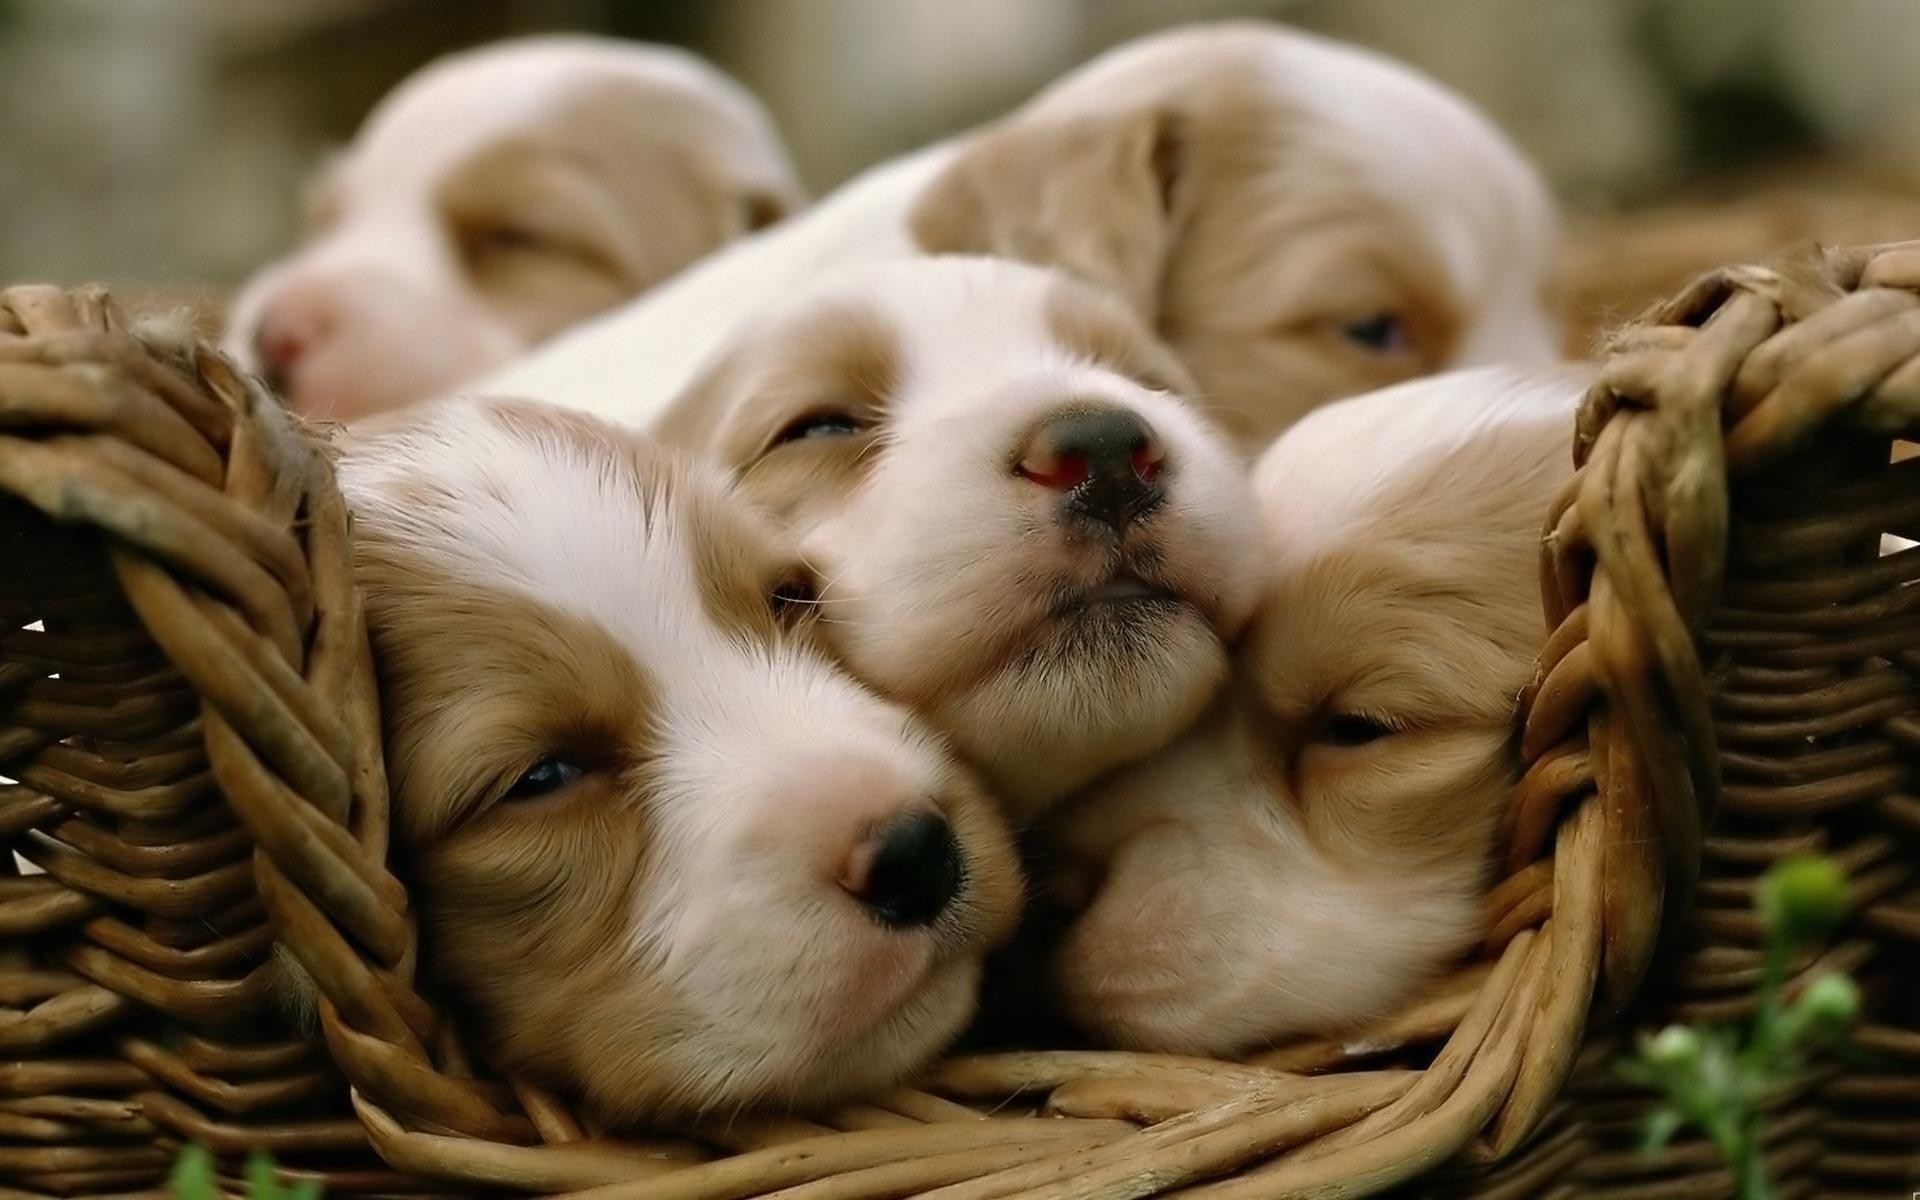 1920x1200 Title : cute puppy wallpapers for desktop (58+ images) Dimension : 1920 x  1200. File Type : JPG/JPEG